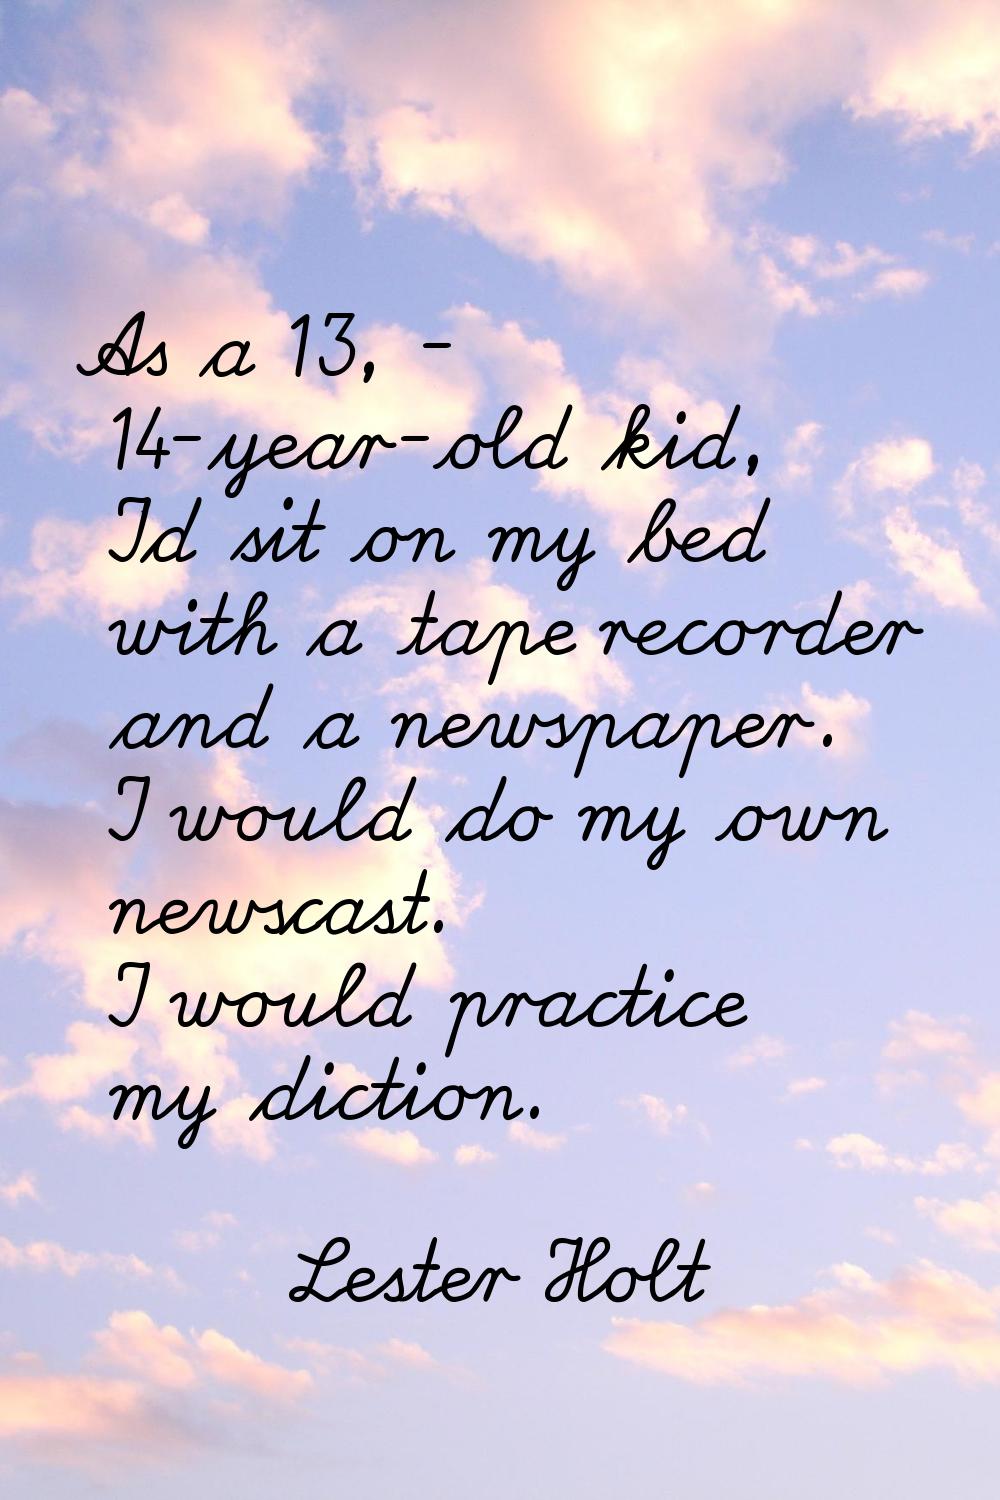 As a 13, - 14-year-old kid, I'd sit on my bed with a tape recorder and a newspaper. I would do my o